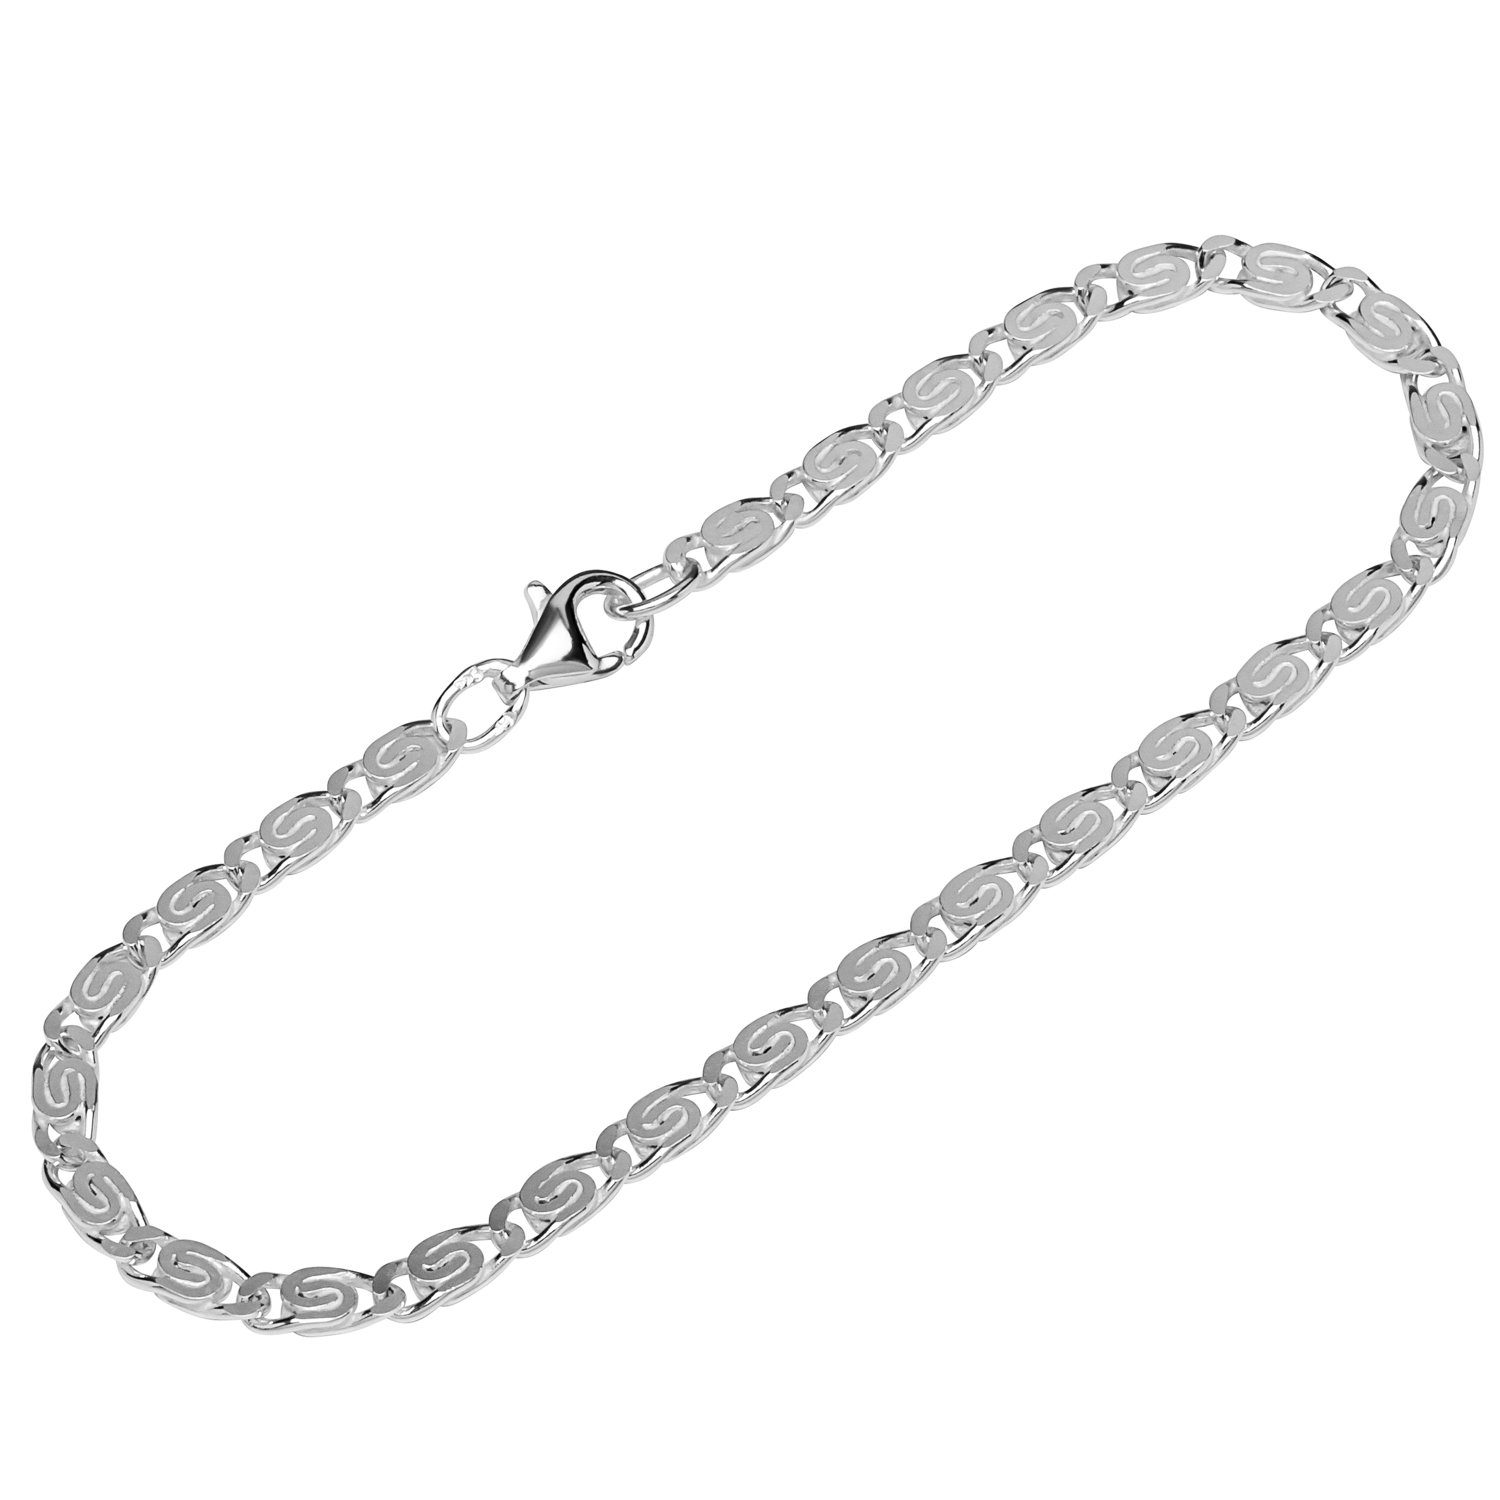 NKlaus Silberarmband Armband 925 Sterling Silber 19cm S Panzerkette dia (1 Stück), Made in Germany